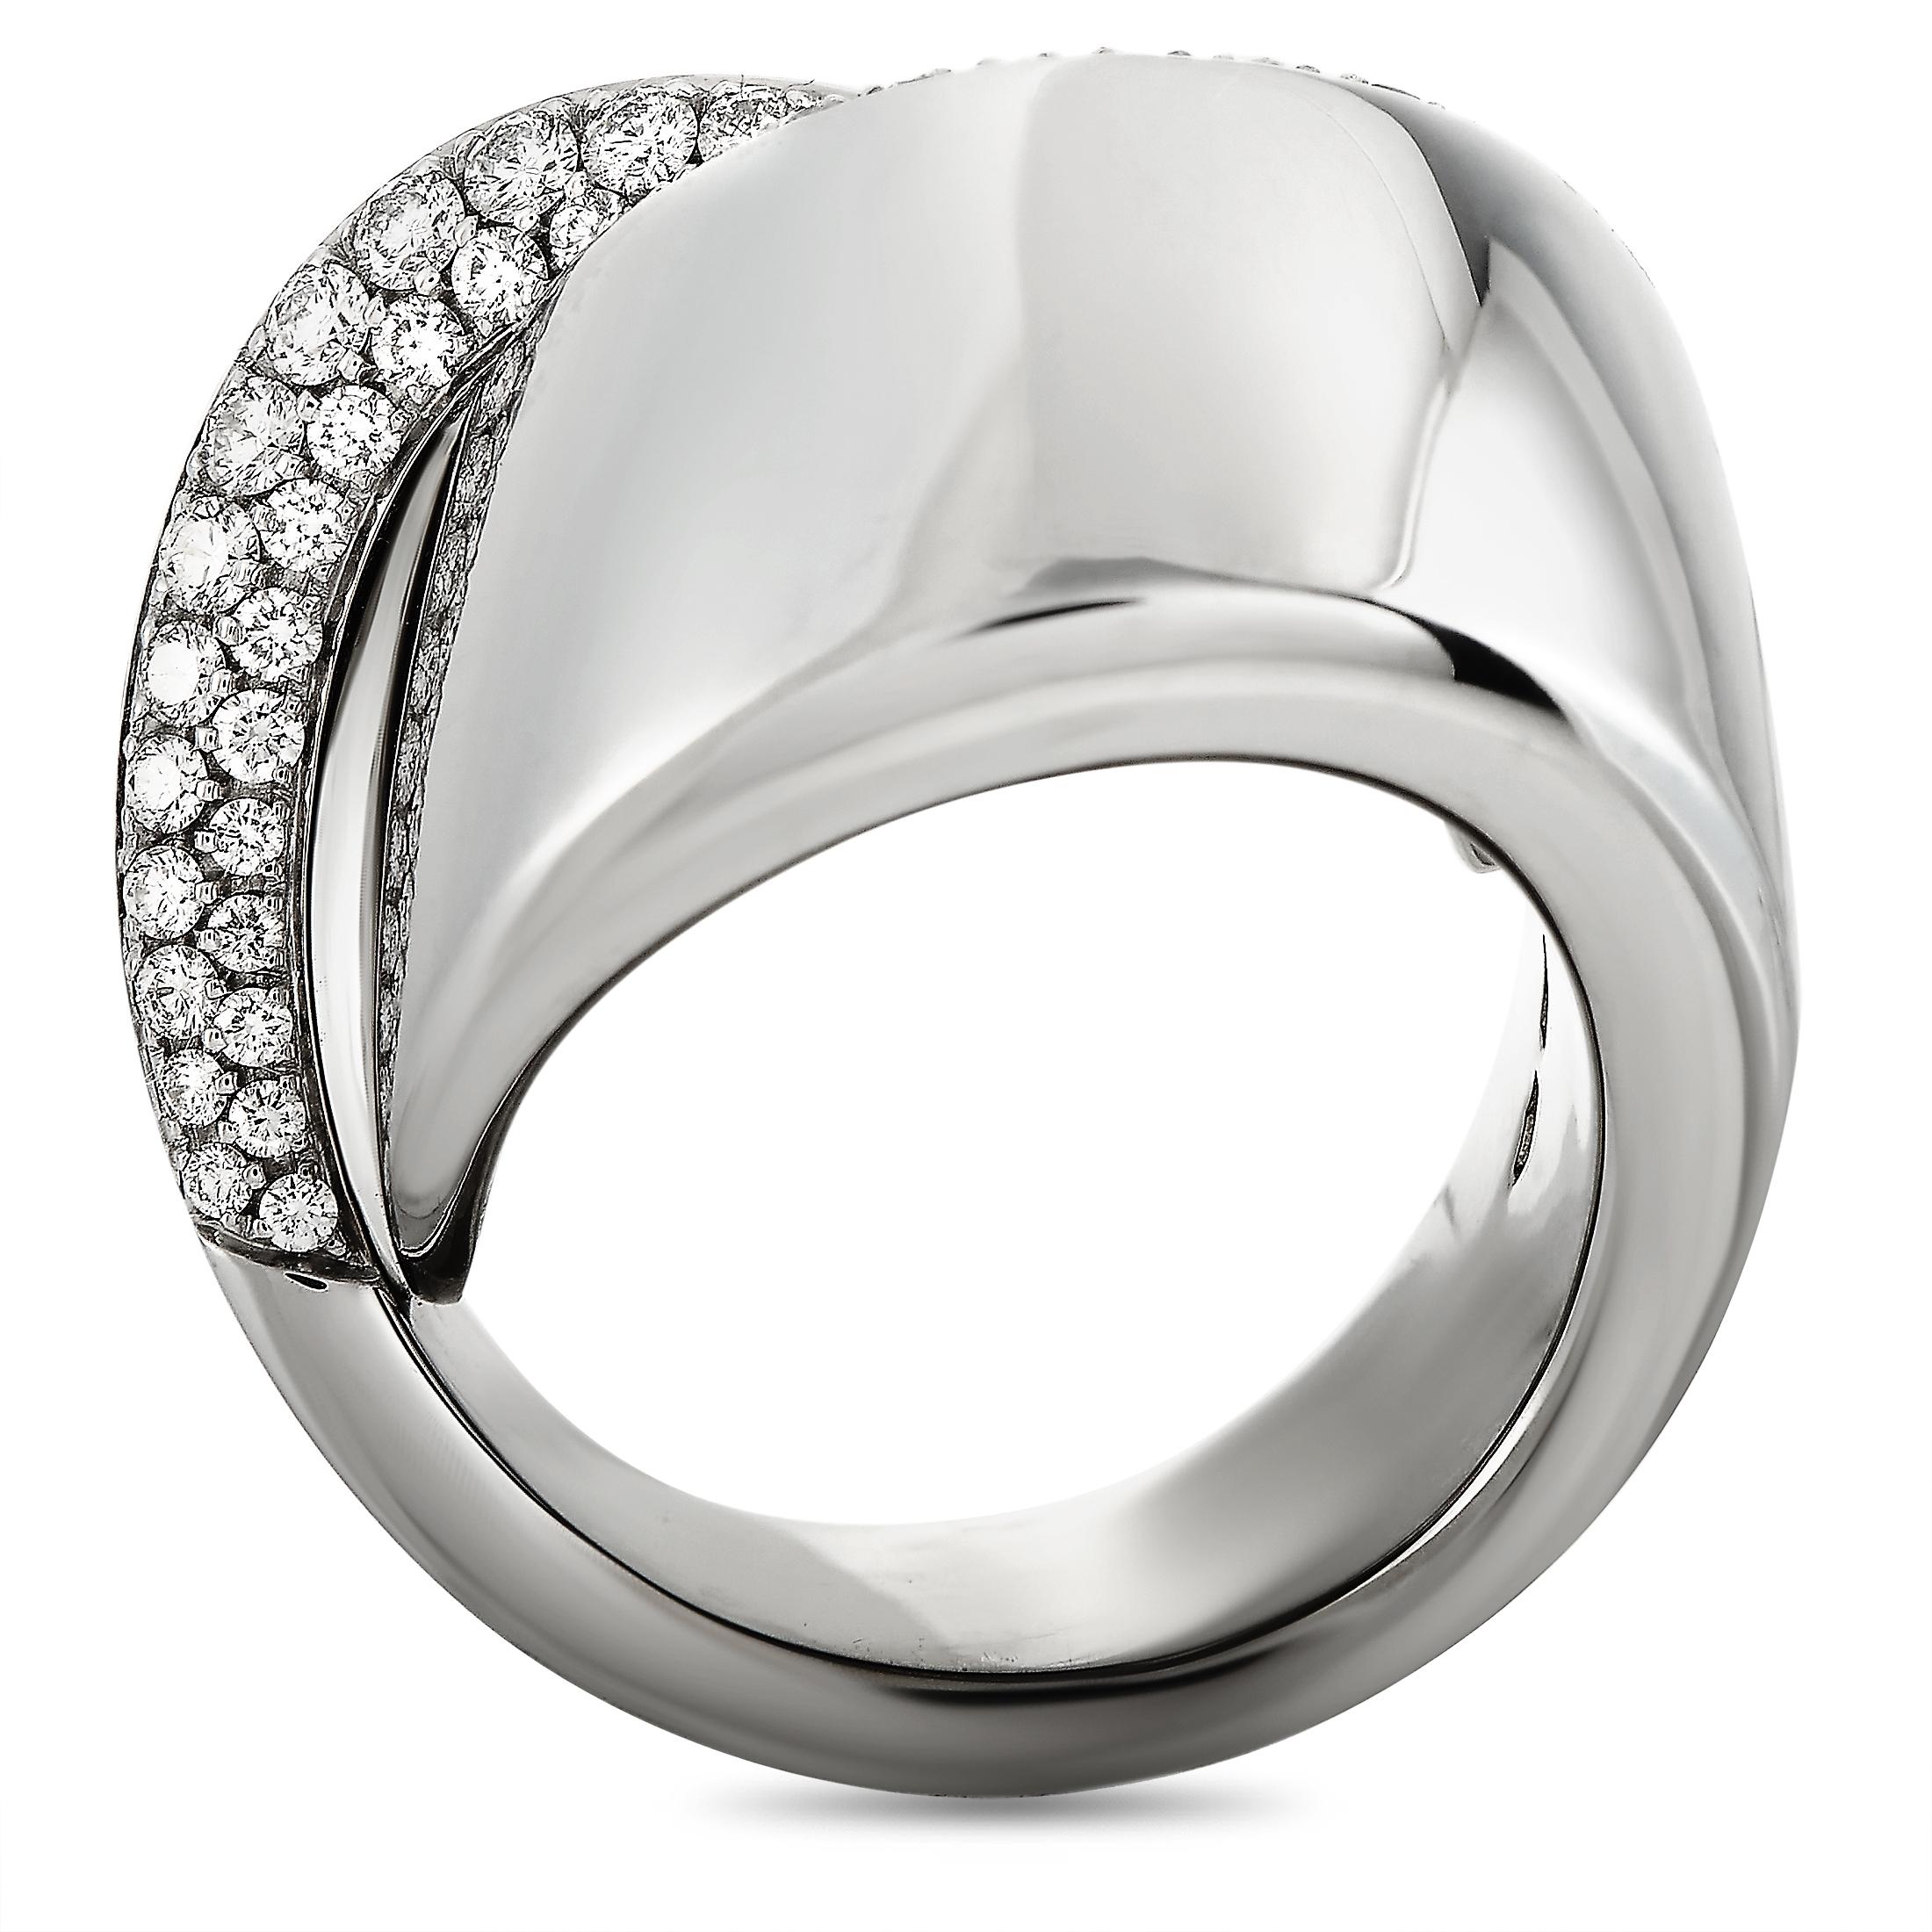 The Vhernier “Abbraccio” ring is crafted from 18K white gold and weighs 26 grams, boasting band thickness of 18 mm and top height of 10 mm, while top dimensions measure 25 by 25 mm. The ring is set with diamonds that amount to 1.17 carats.

This